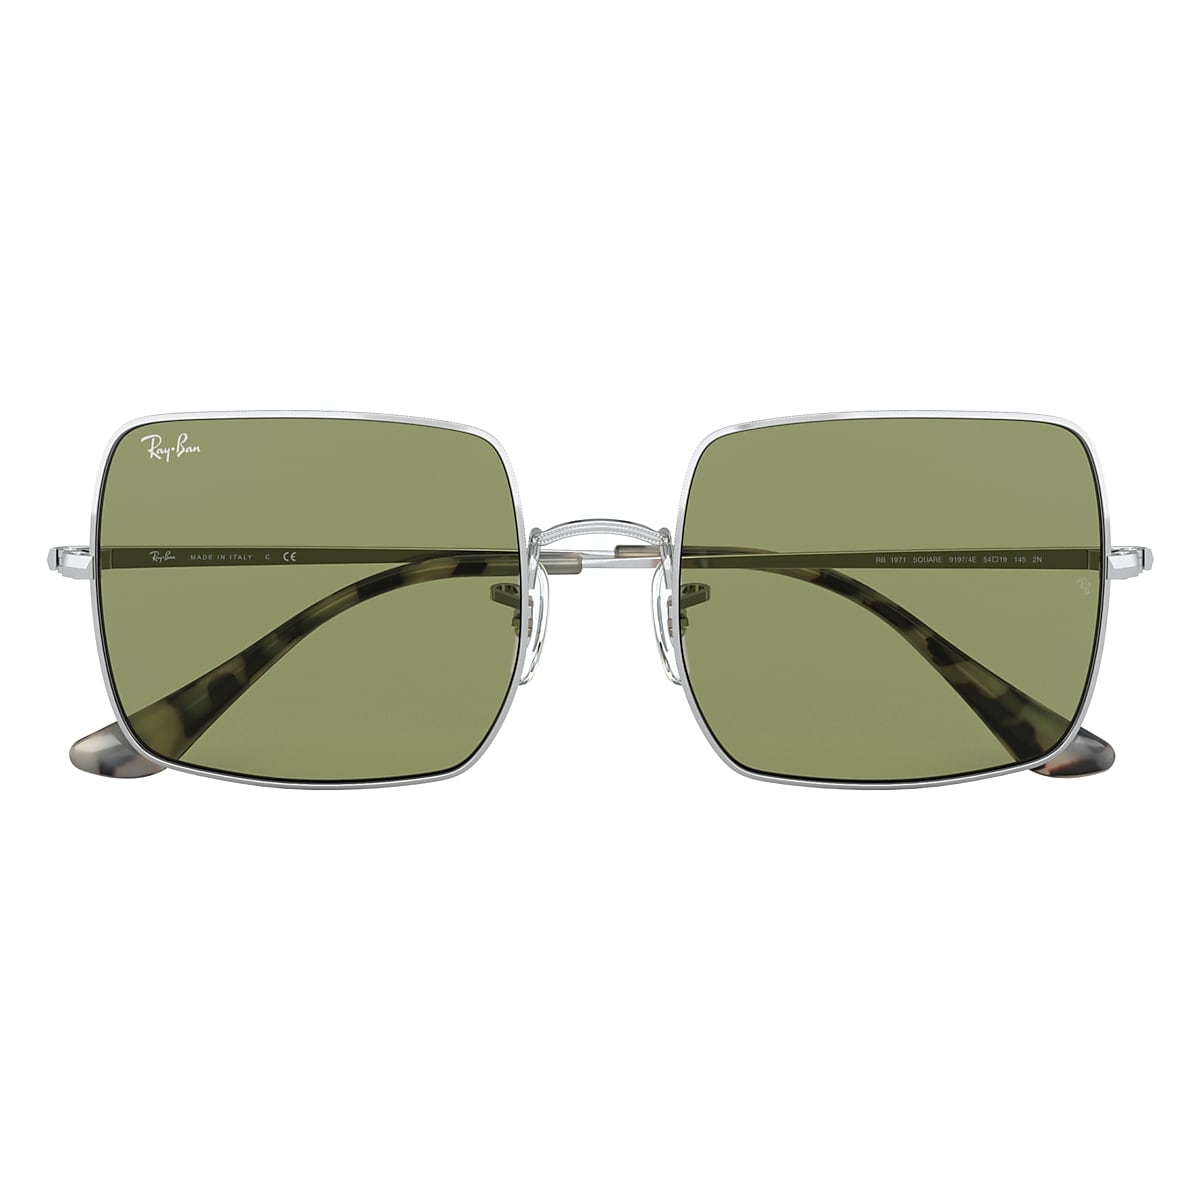 Square 1971 Classic Sunglasses in Silver and Light Green | Ray-Ban®